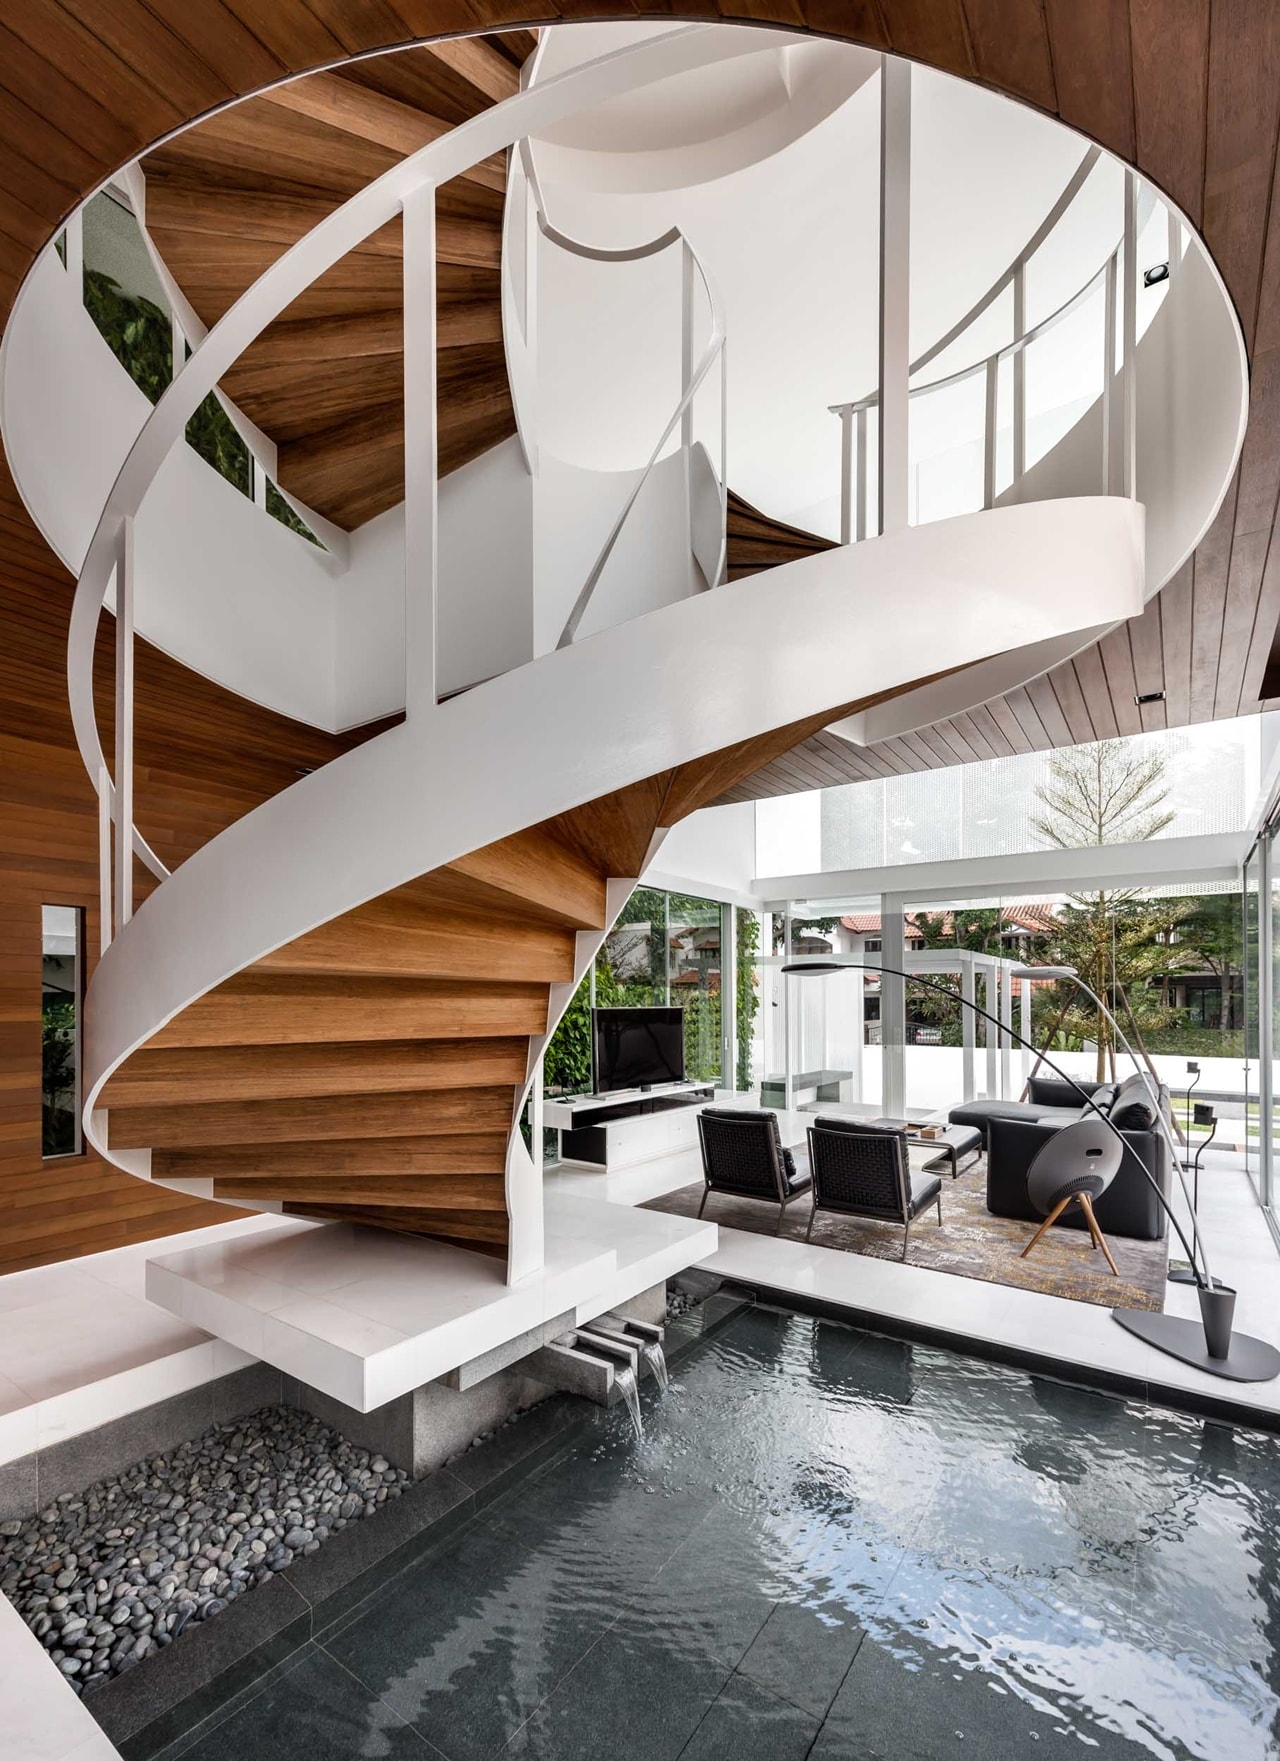 Curved staircase with indoor pond designed by Park Associates Architects